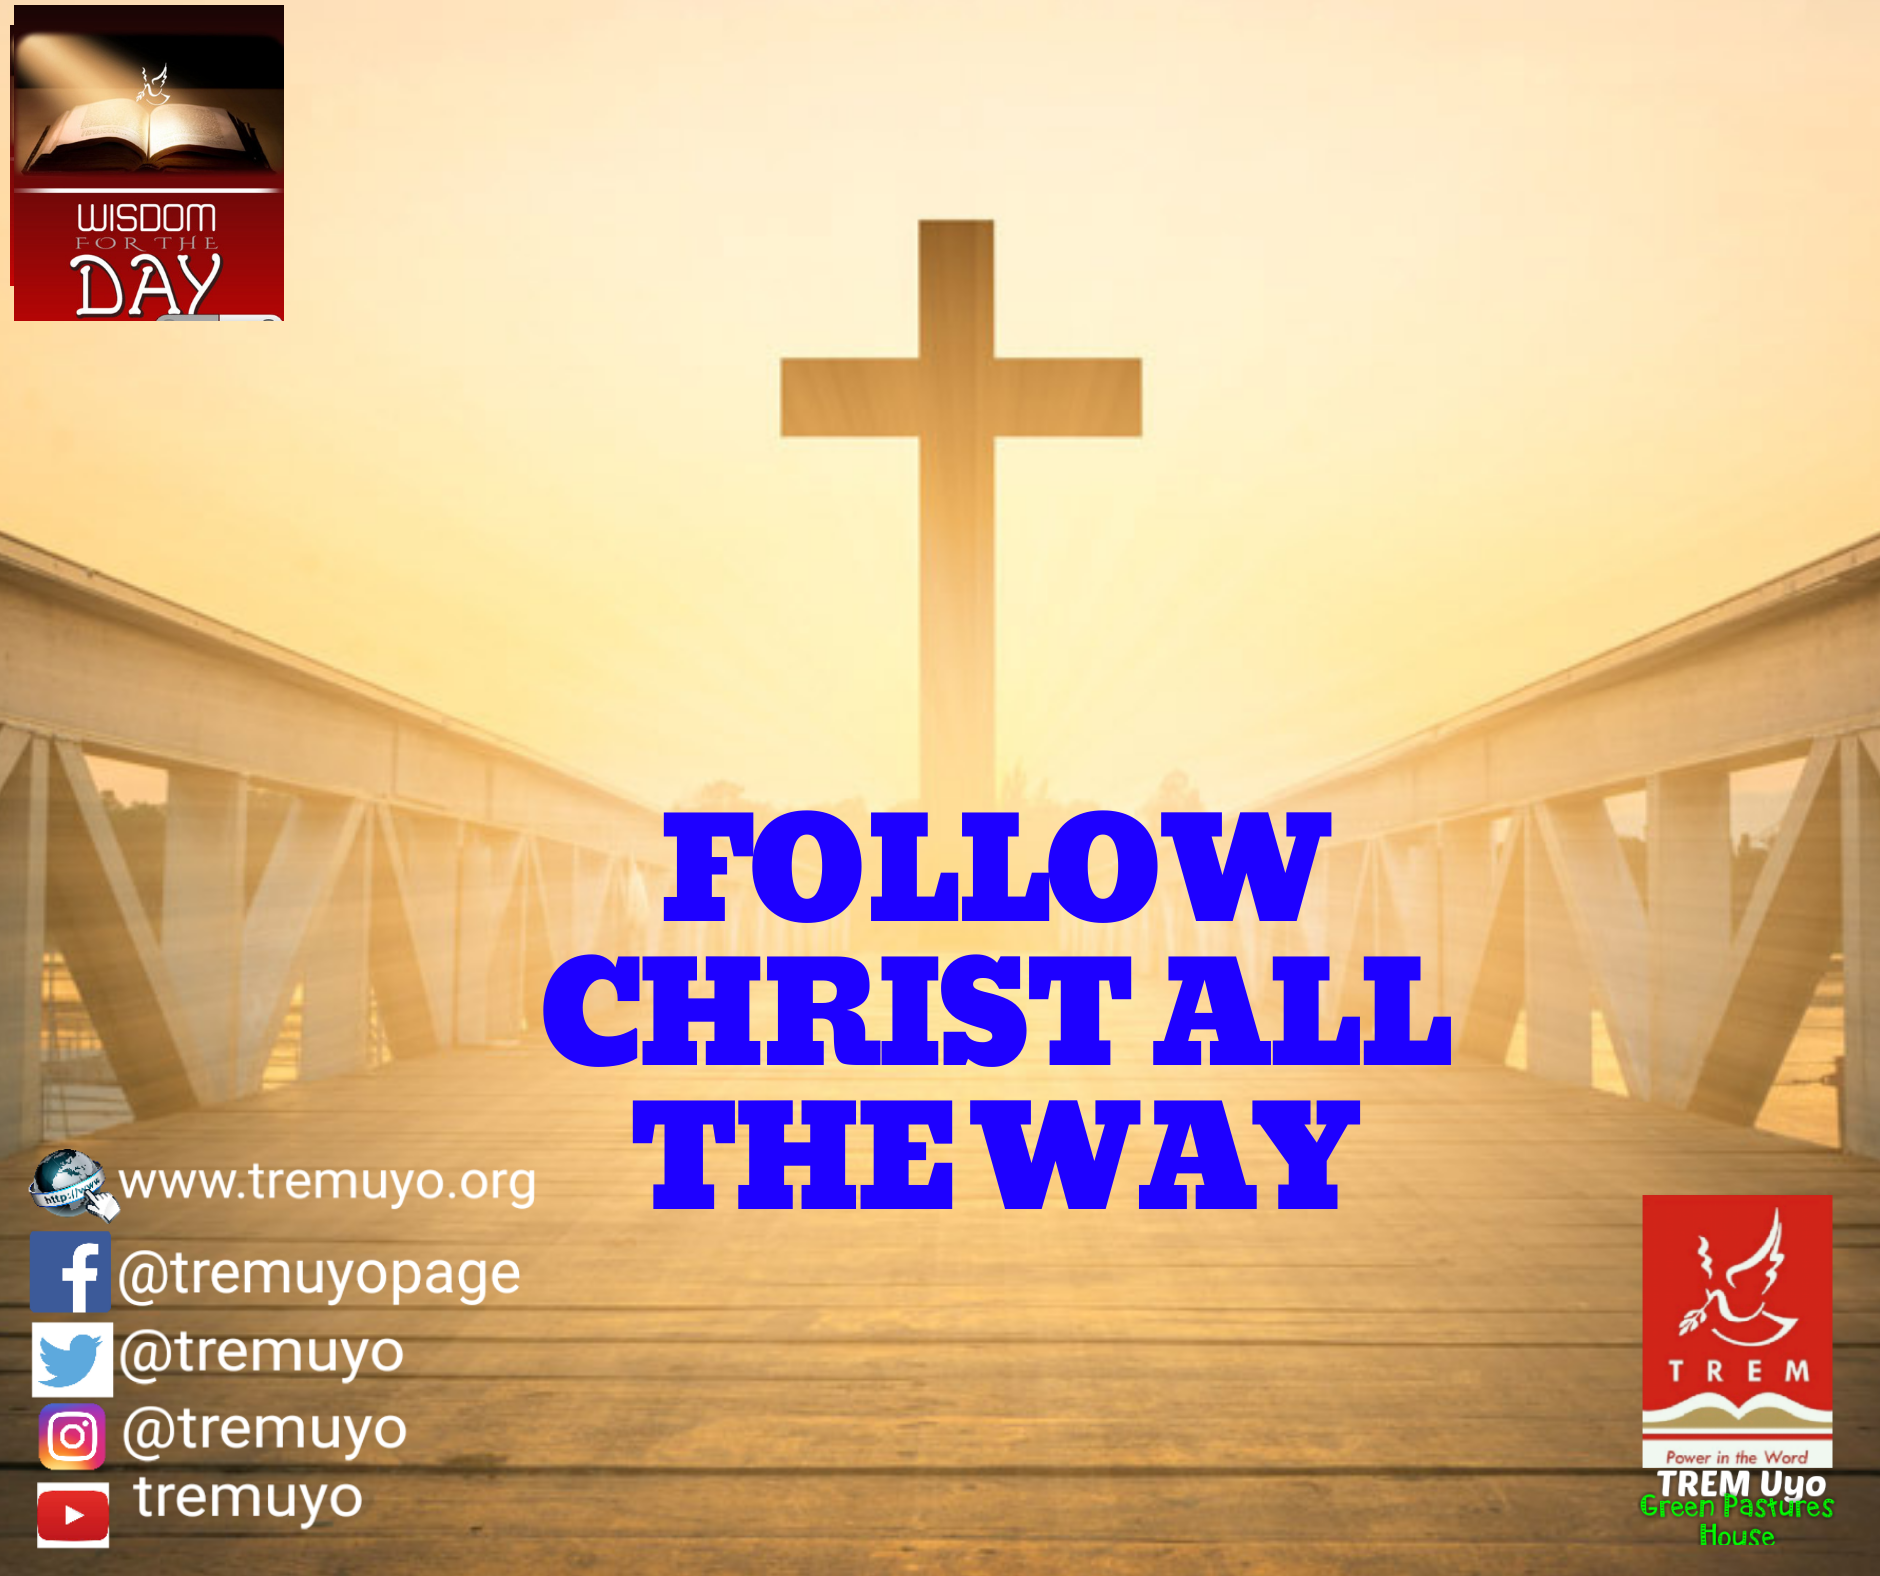 FOLLOW CHRIST ALL THE WAY